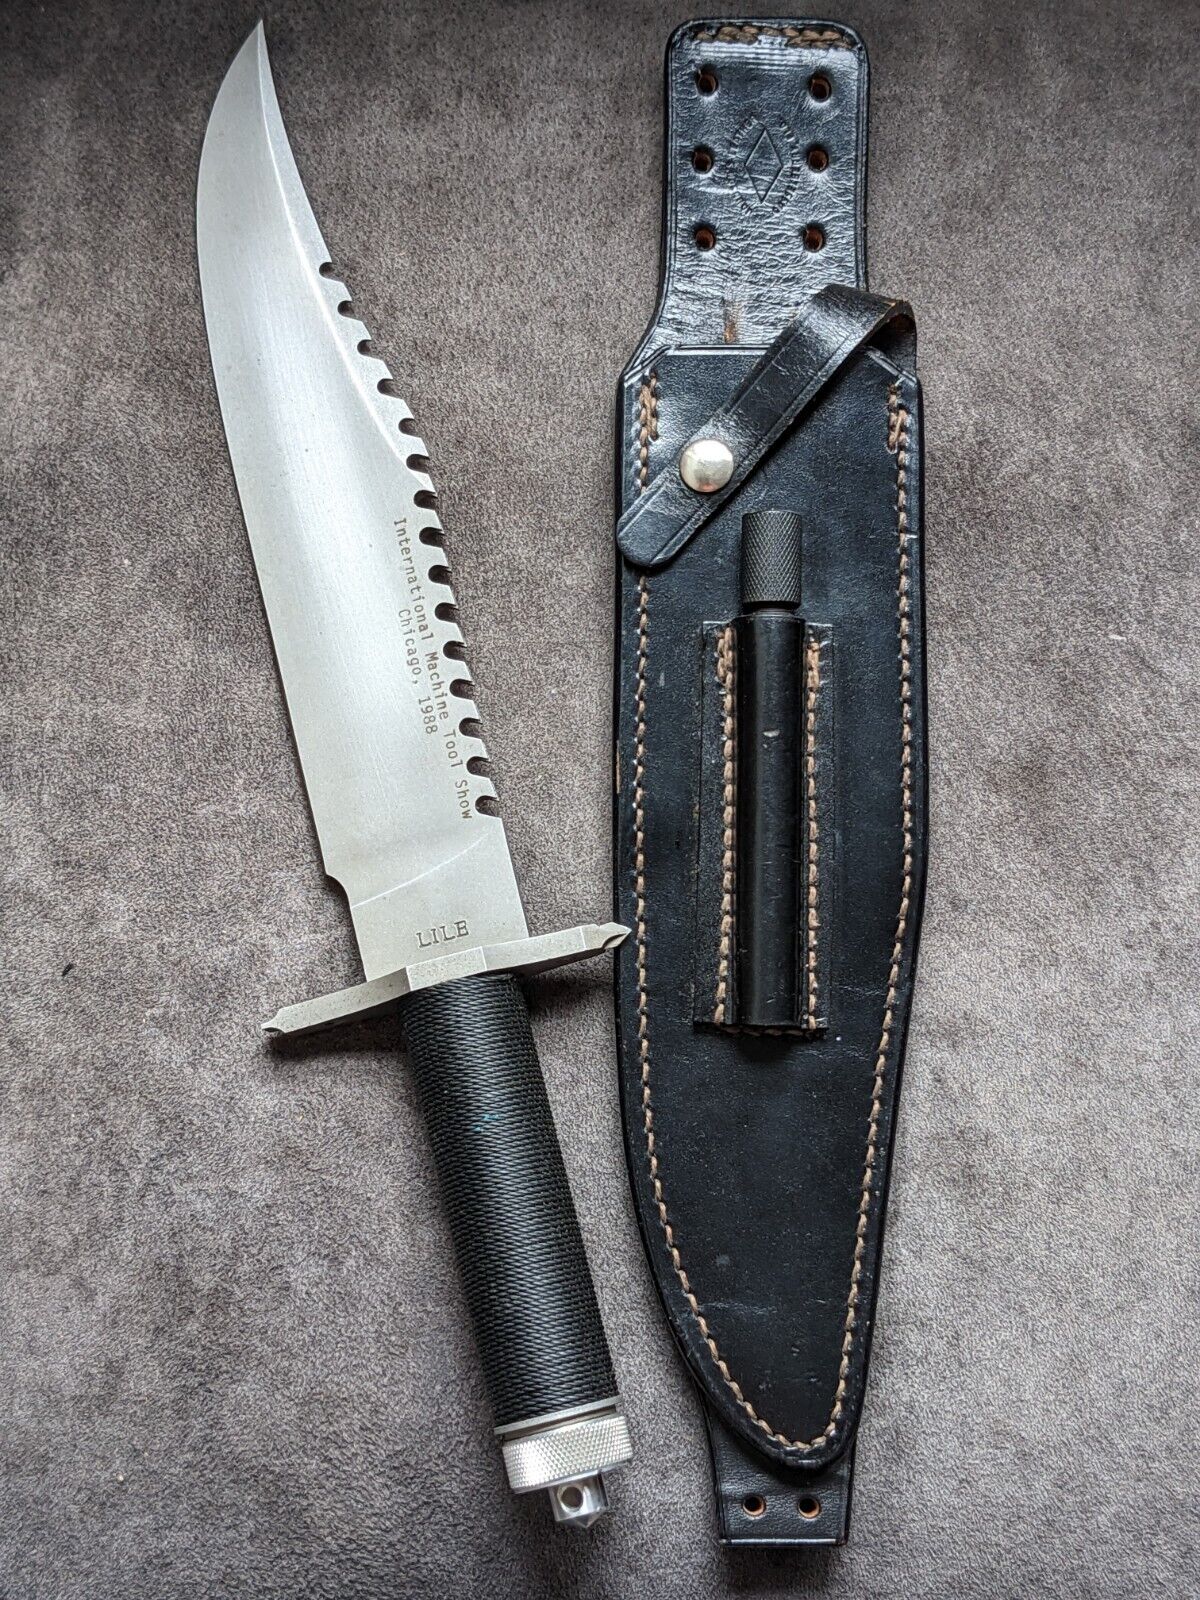 Jimmy Lile Rambo The Mission Excellent condition w/custom Engraving & sheath